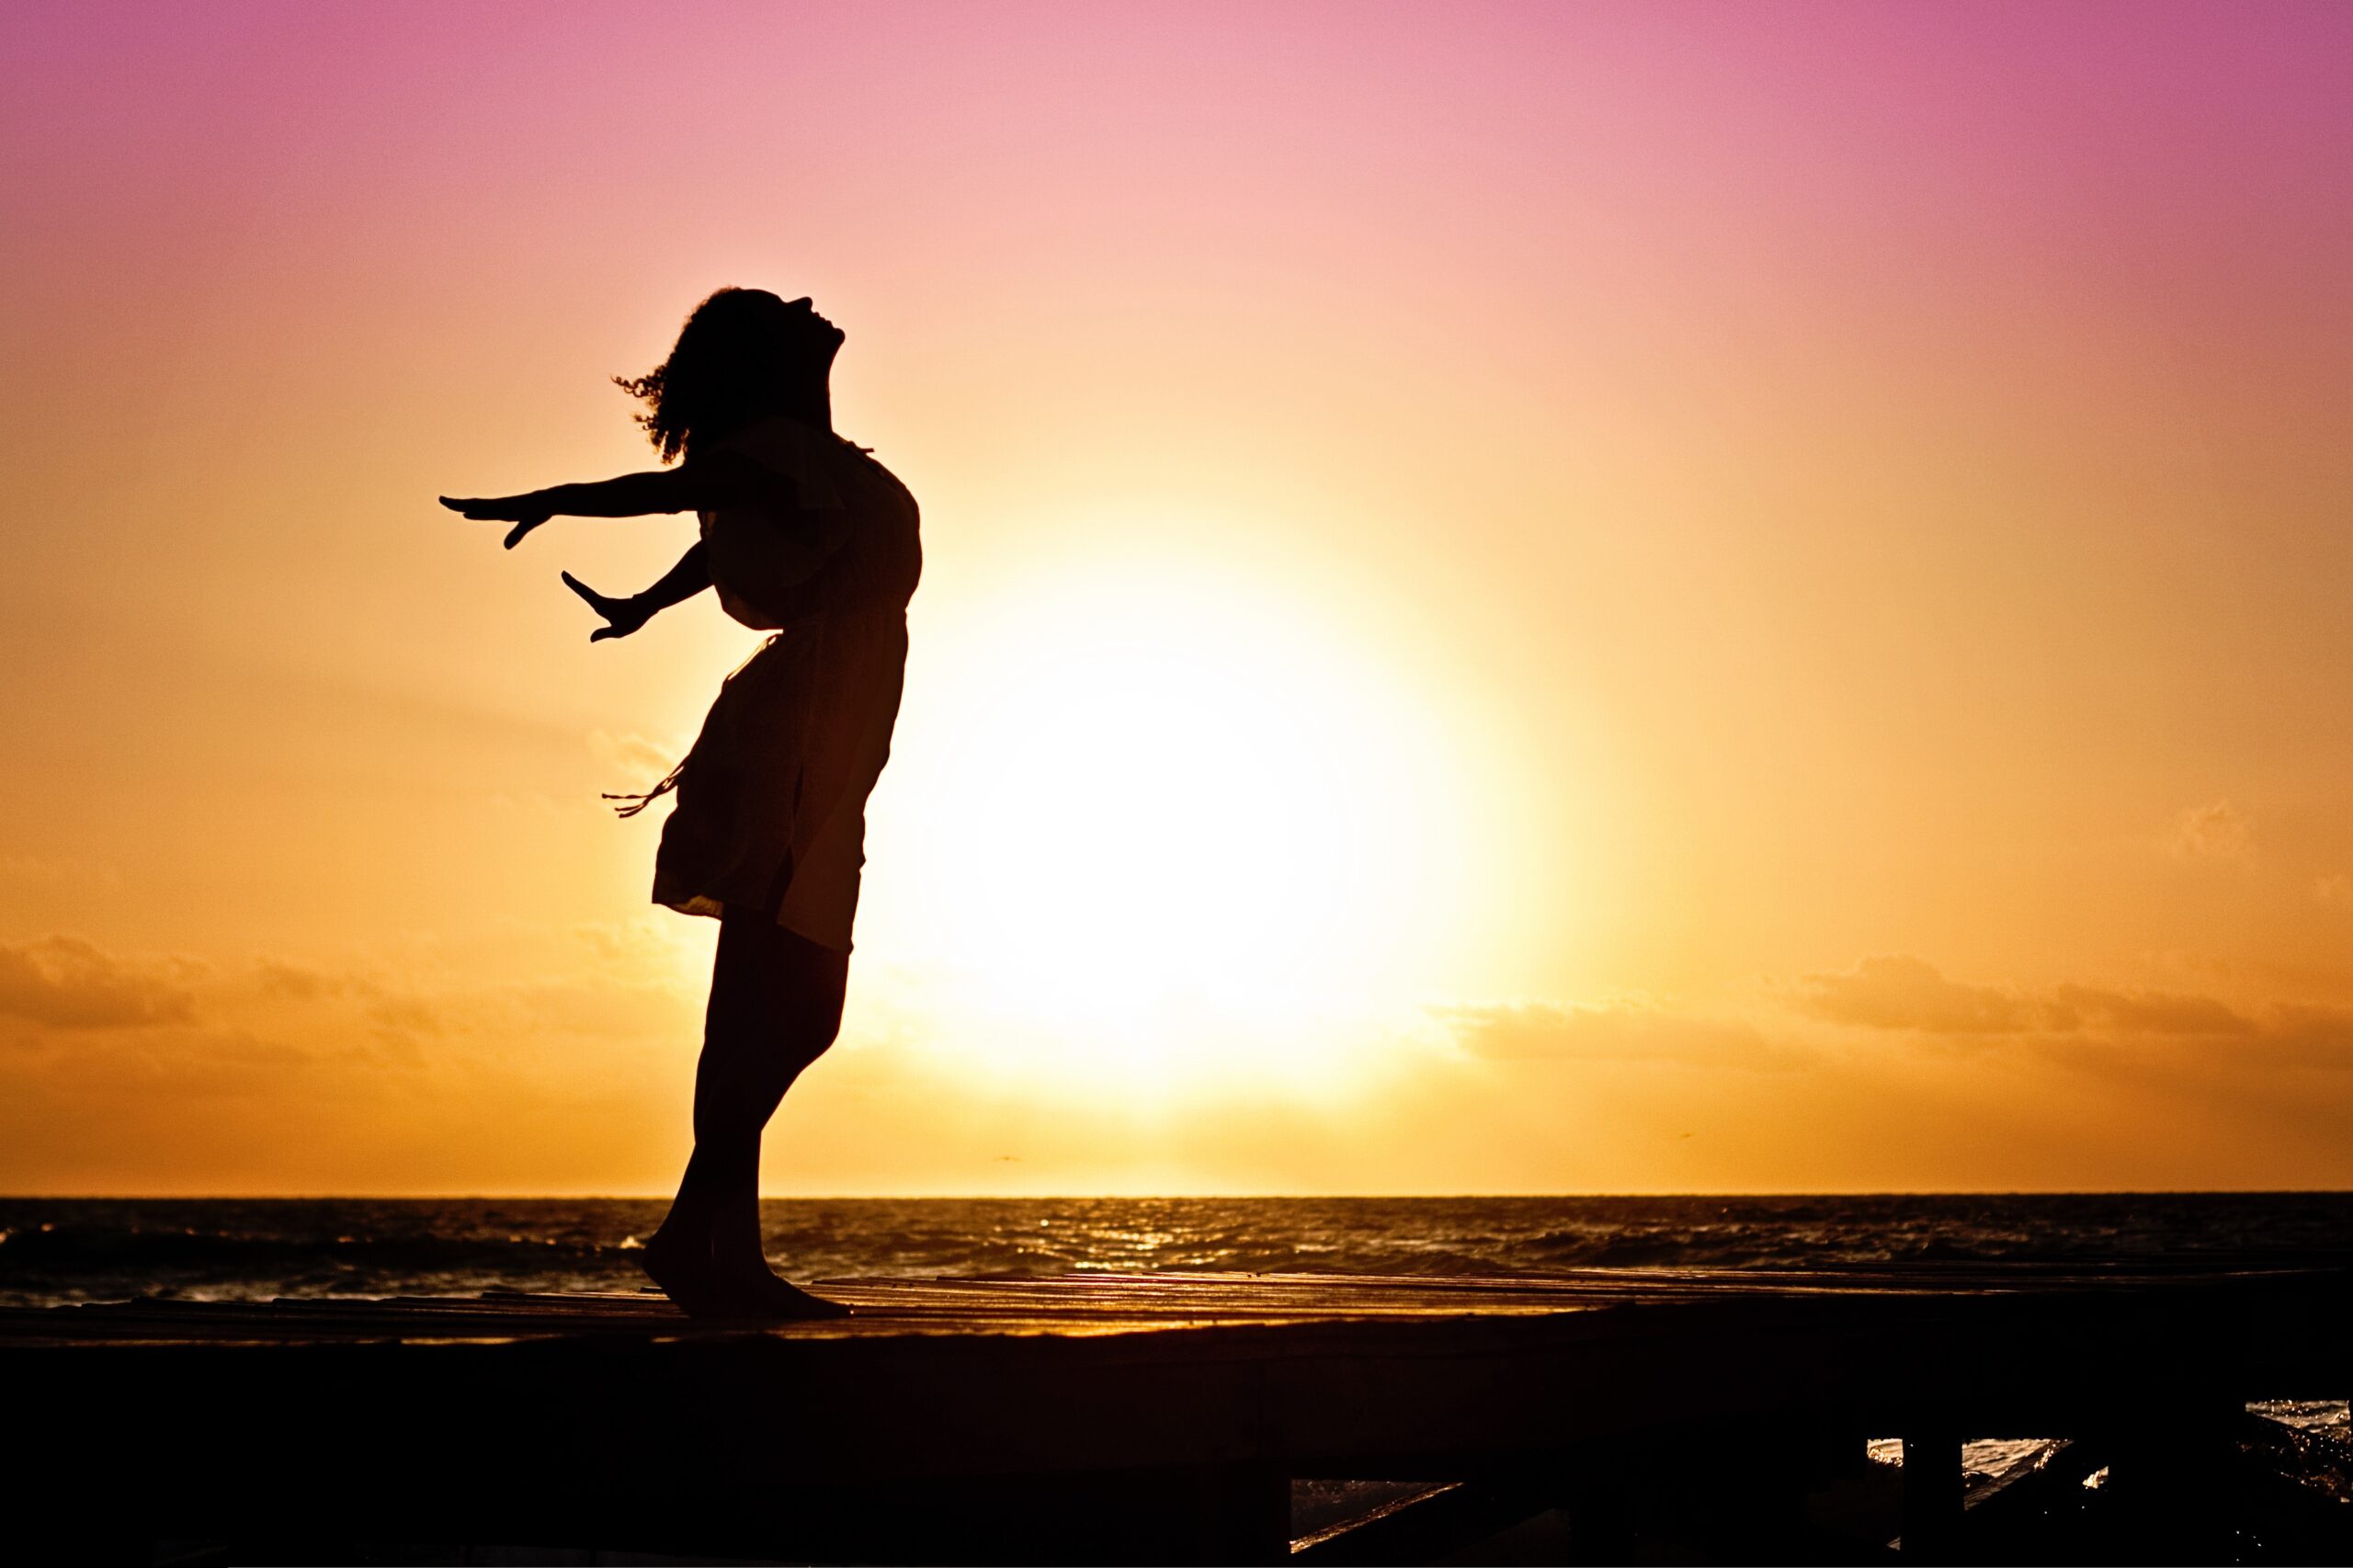 Confident woman silhouetted against a radiant sunset, symbolizing the empowerment and personal growth attained through sharing life experiences.